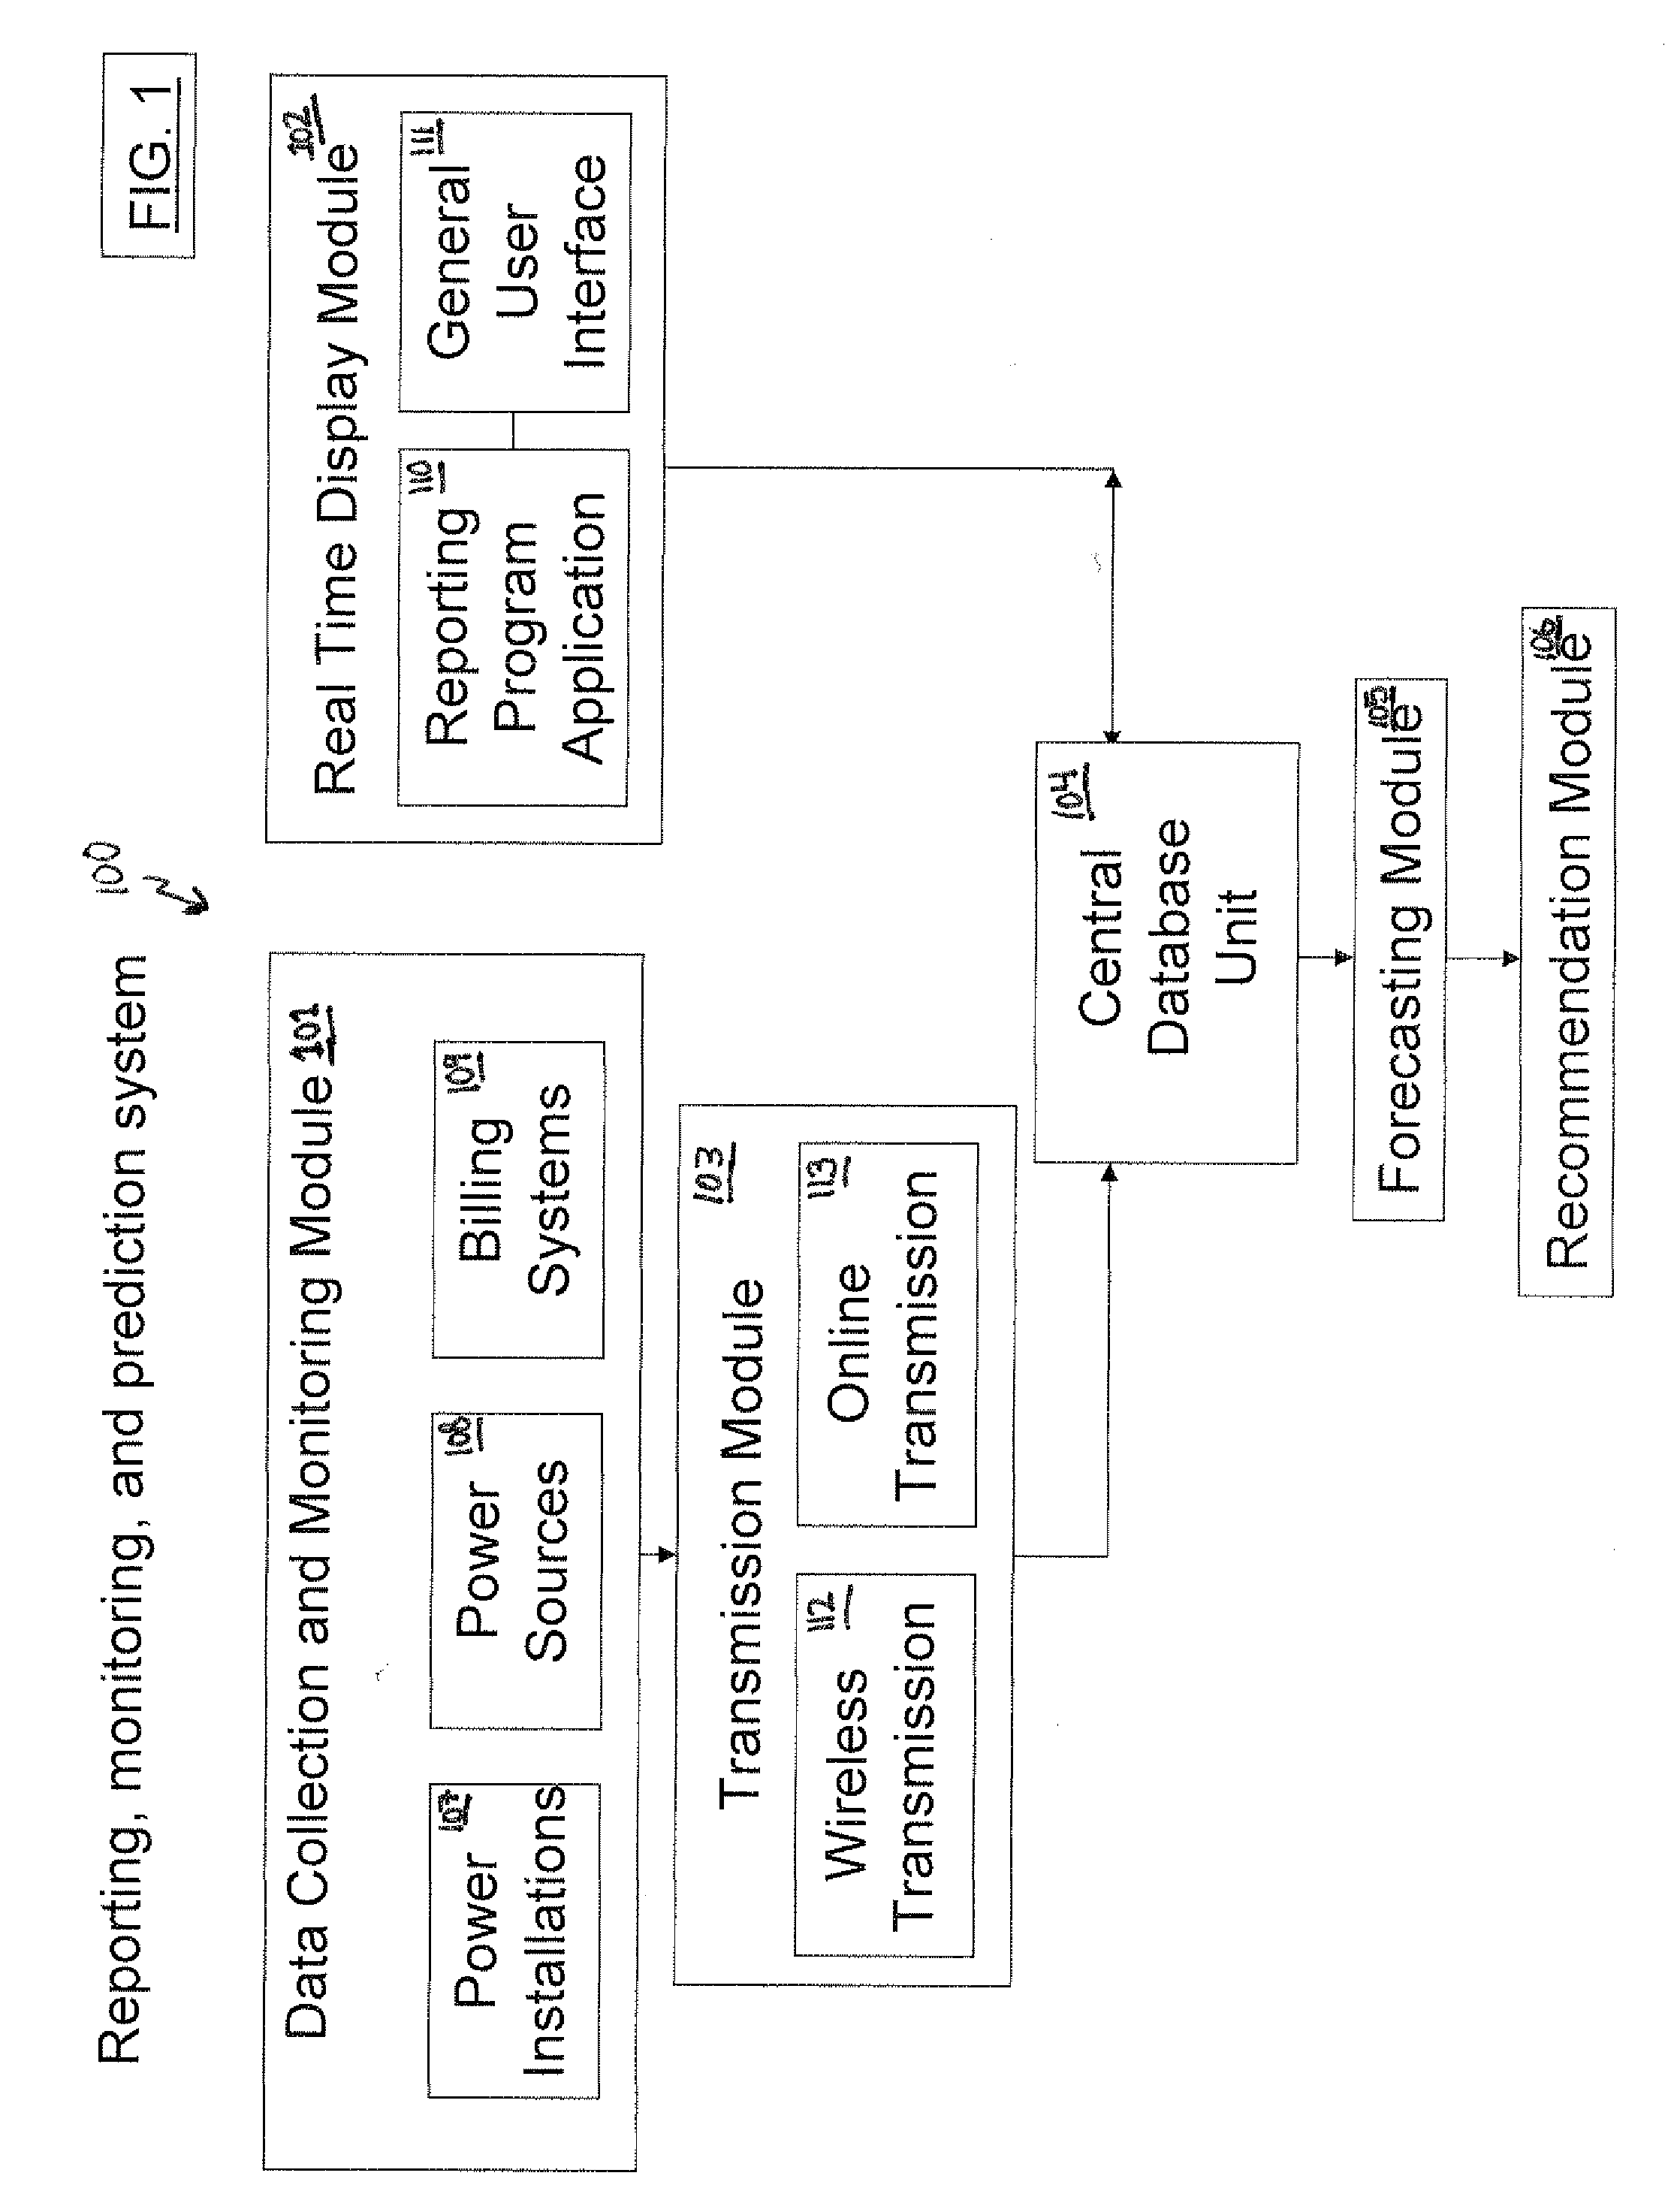 System and Method for Data Processing and Transferring in a Multi Computer Environment for Energy Reporting and Forecasting